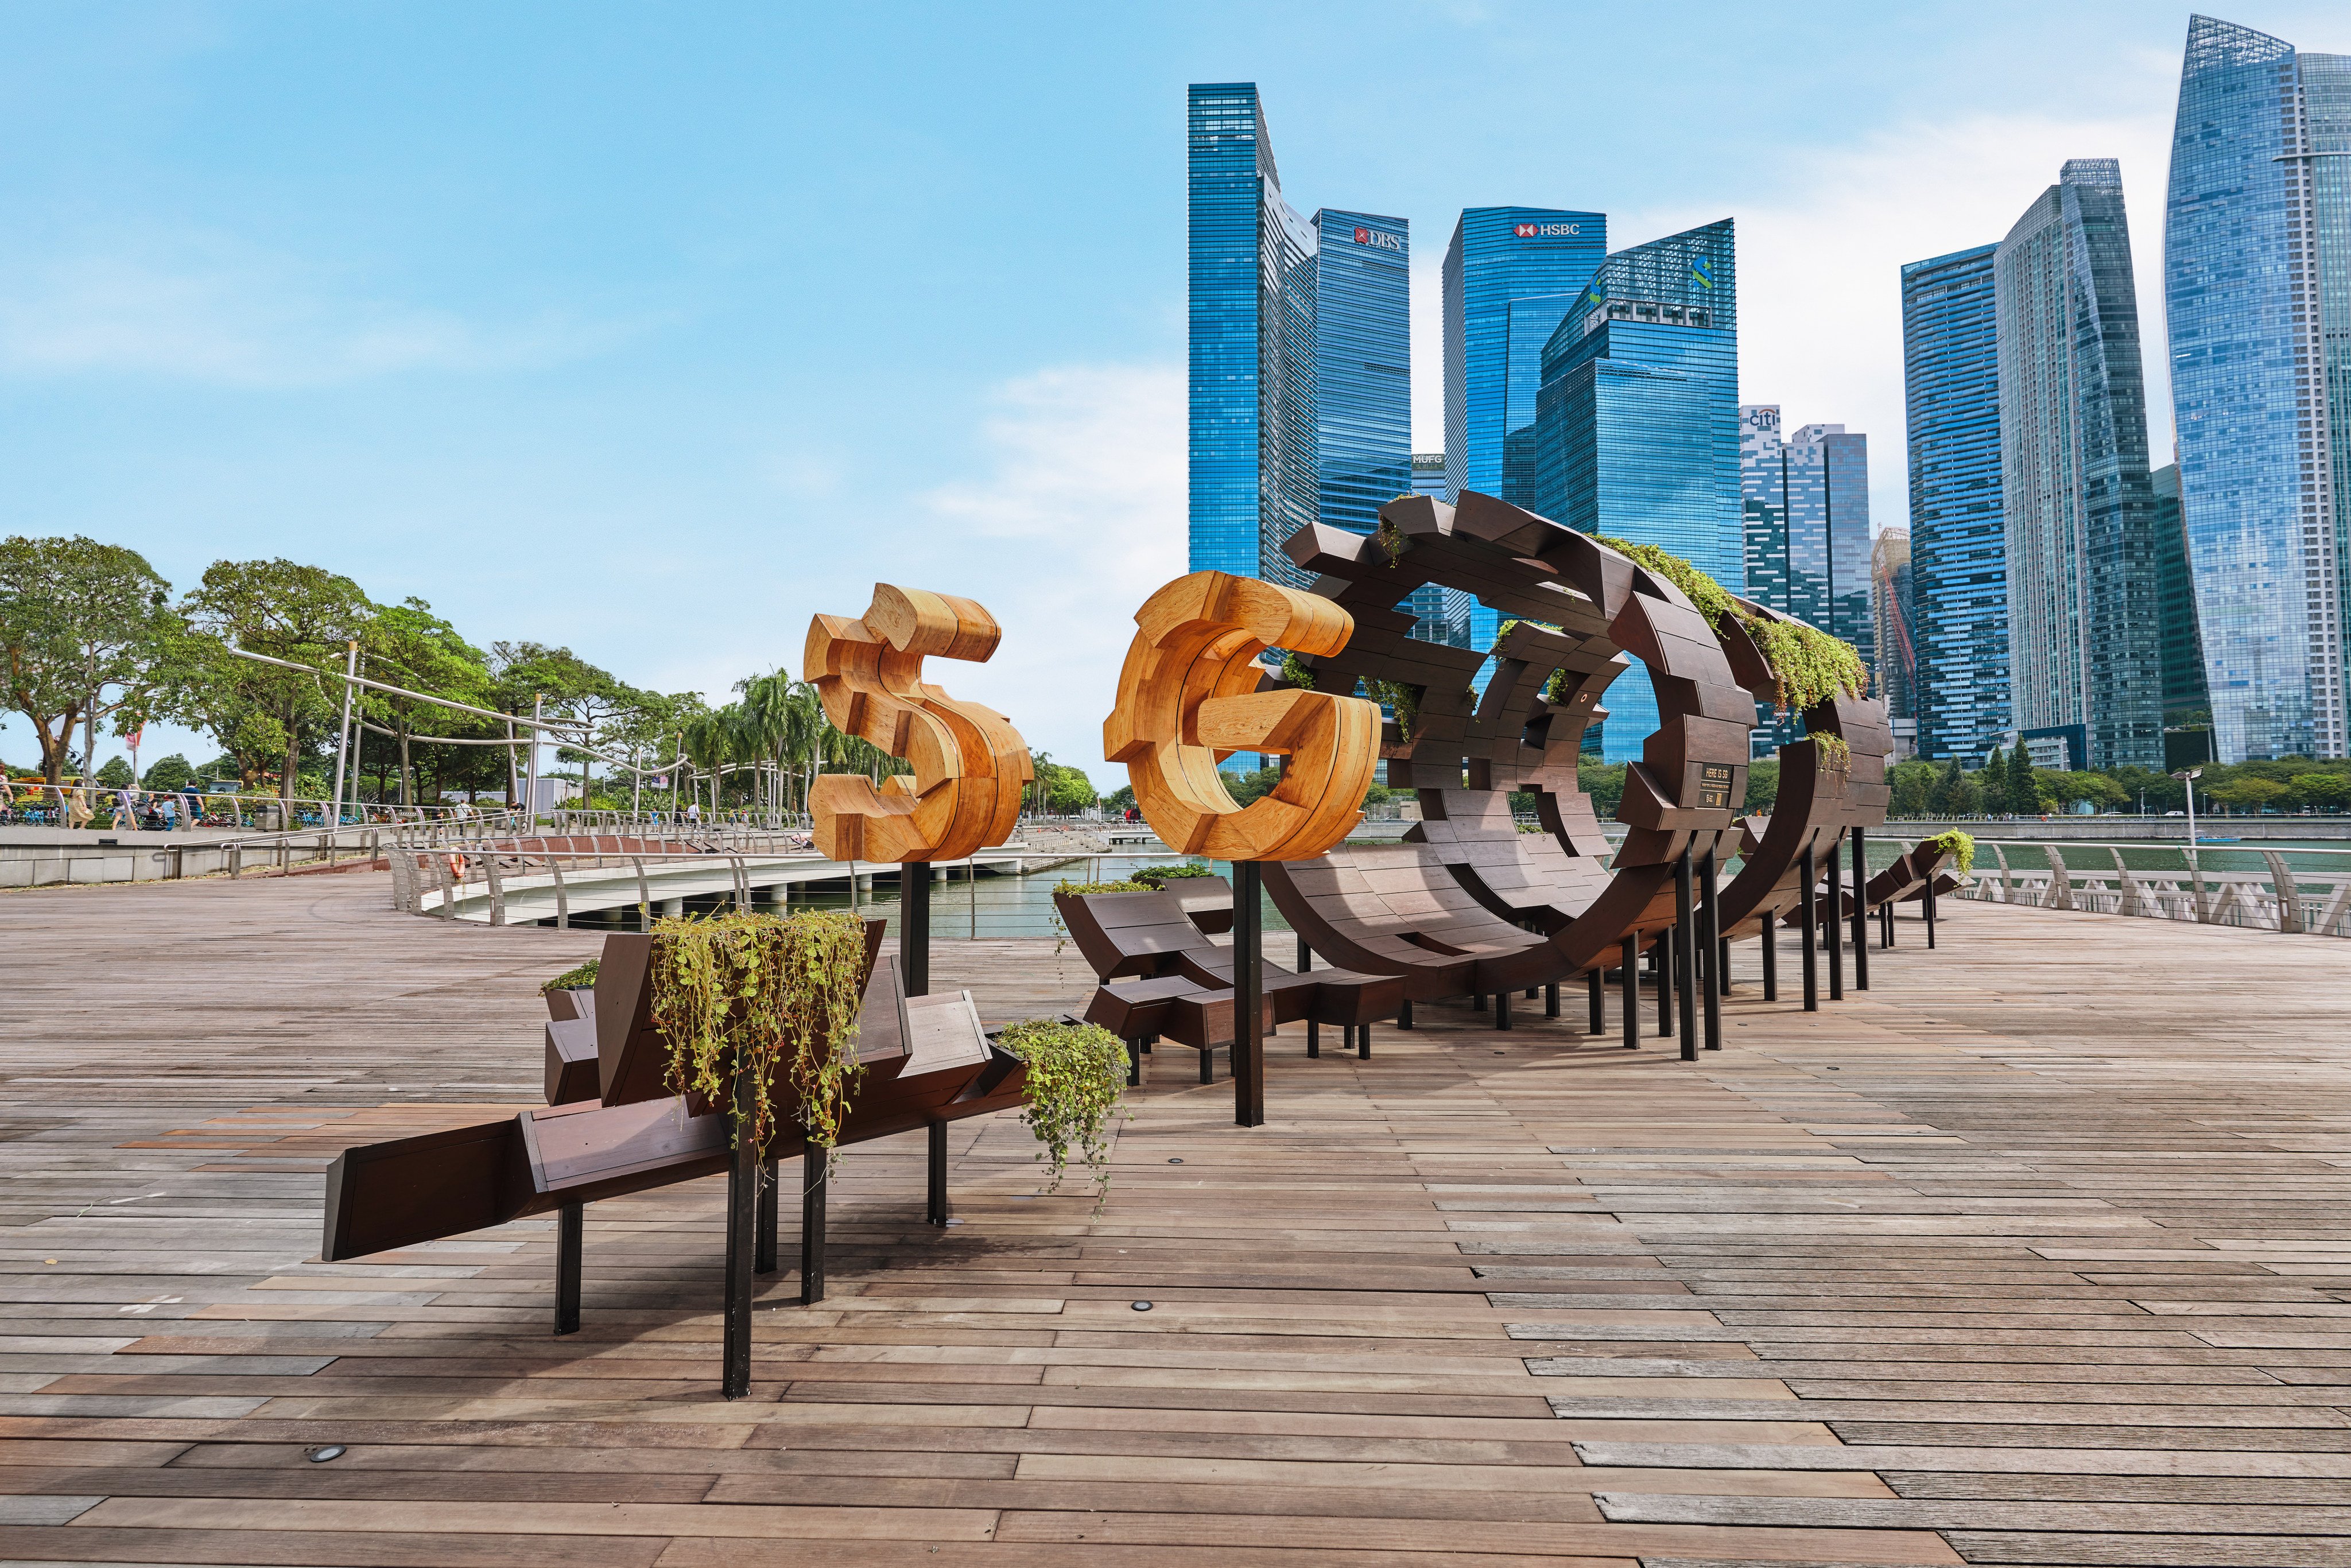 Singapore’s latest and possibly most Instagram-friendly public artwork, Here Is SG, is located along the Marina Bay promenade.